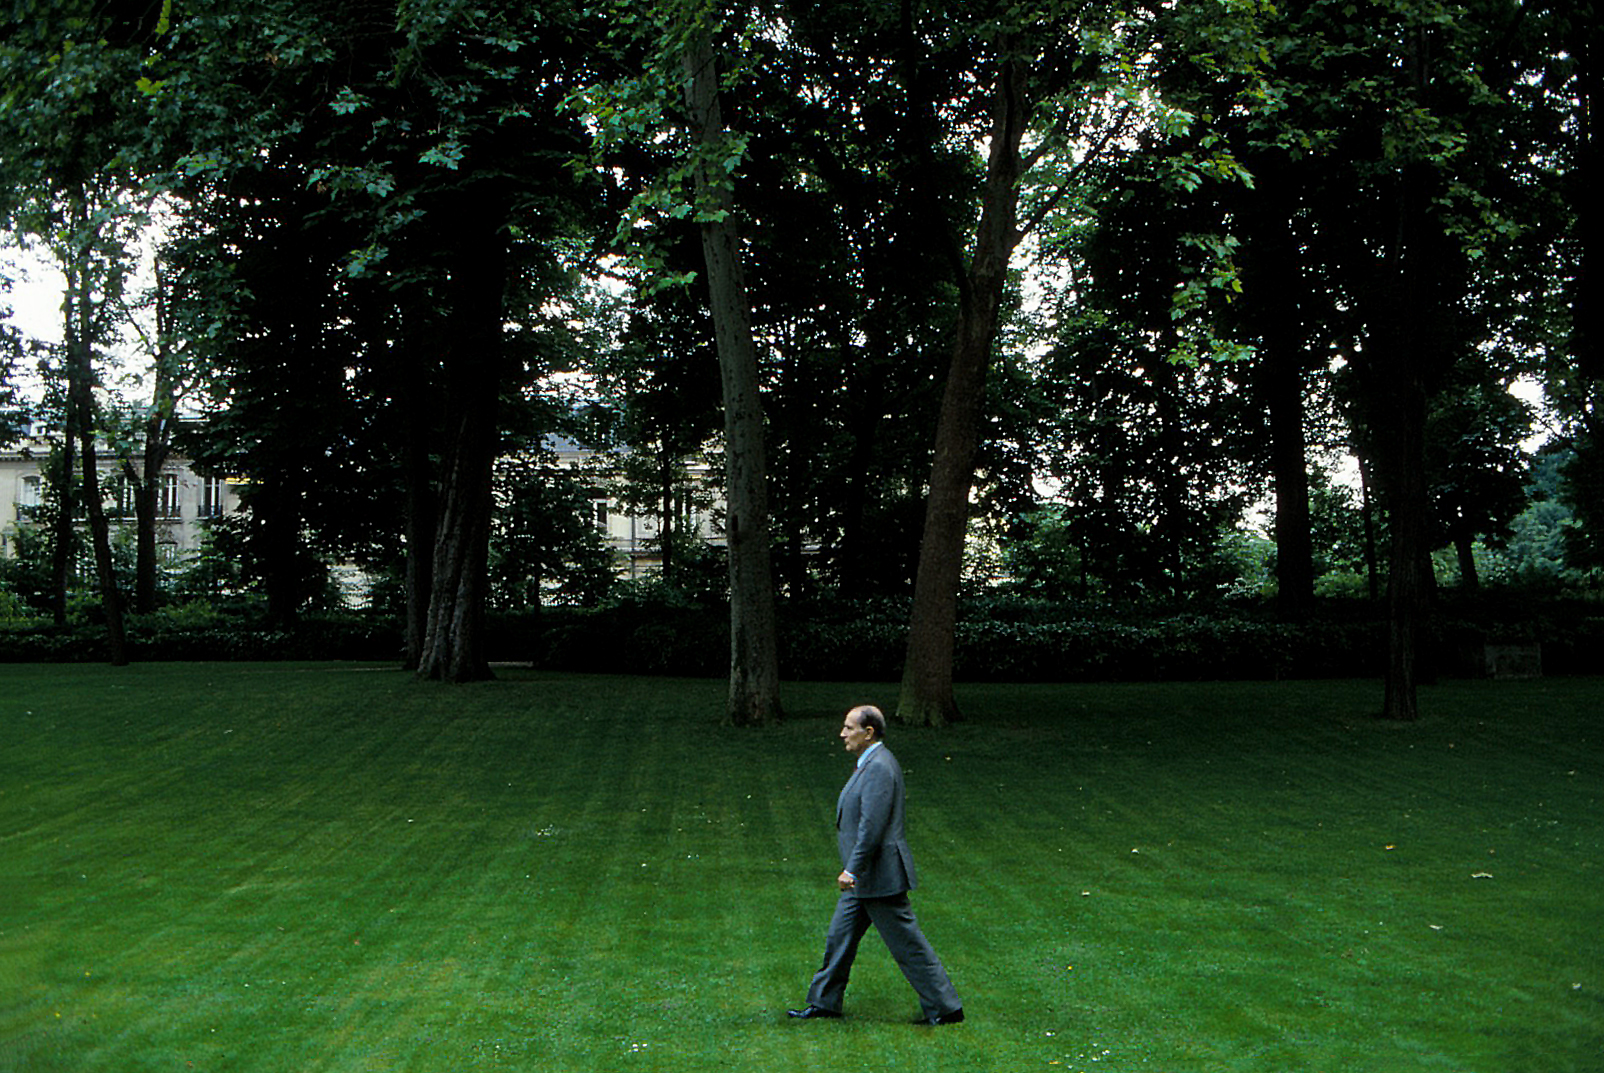  President Mitterrand at the Elysee Palace gardens 